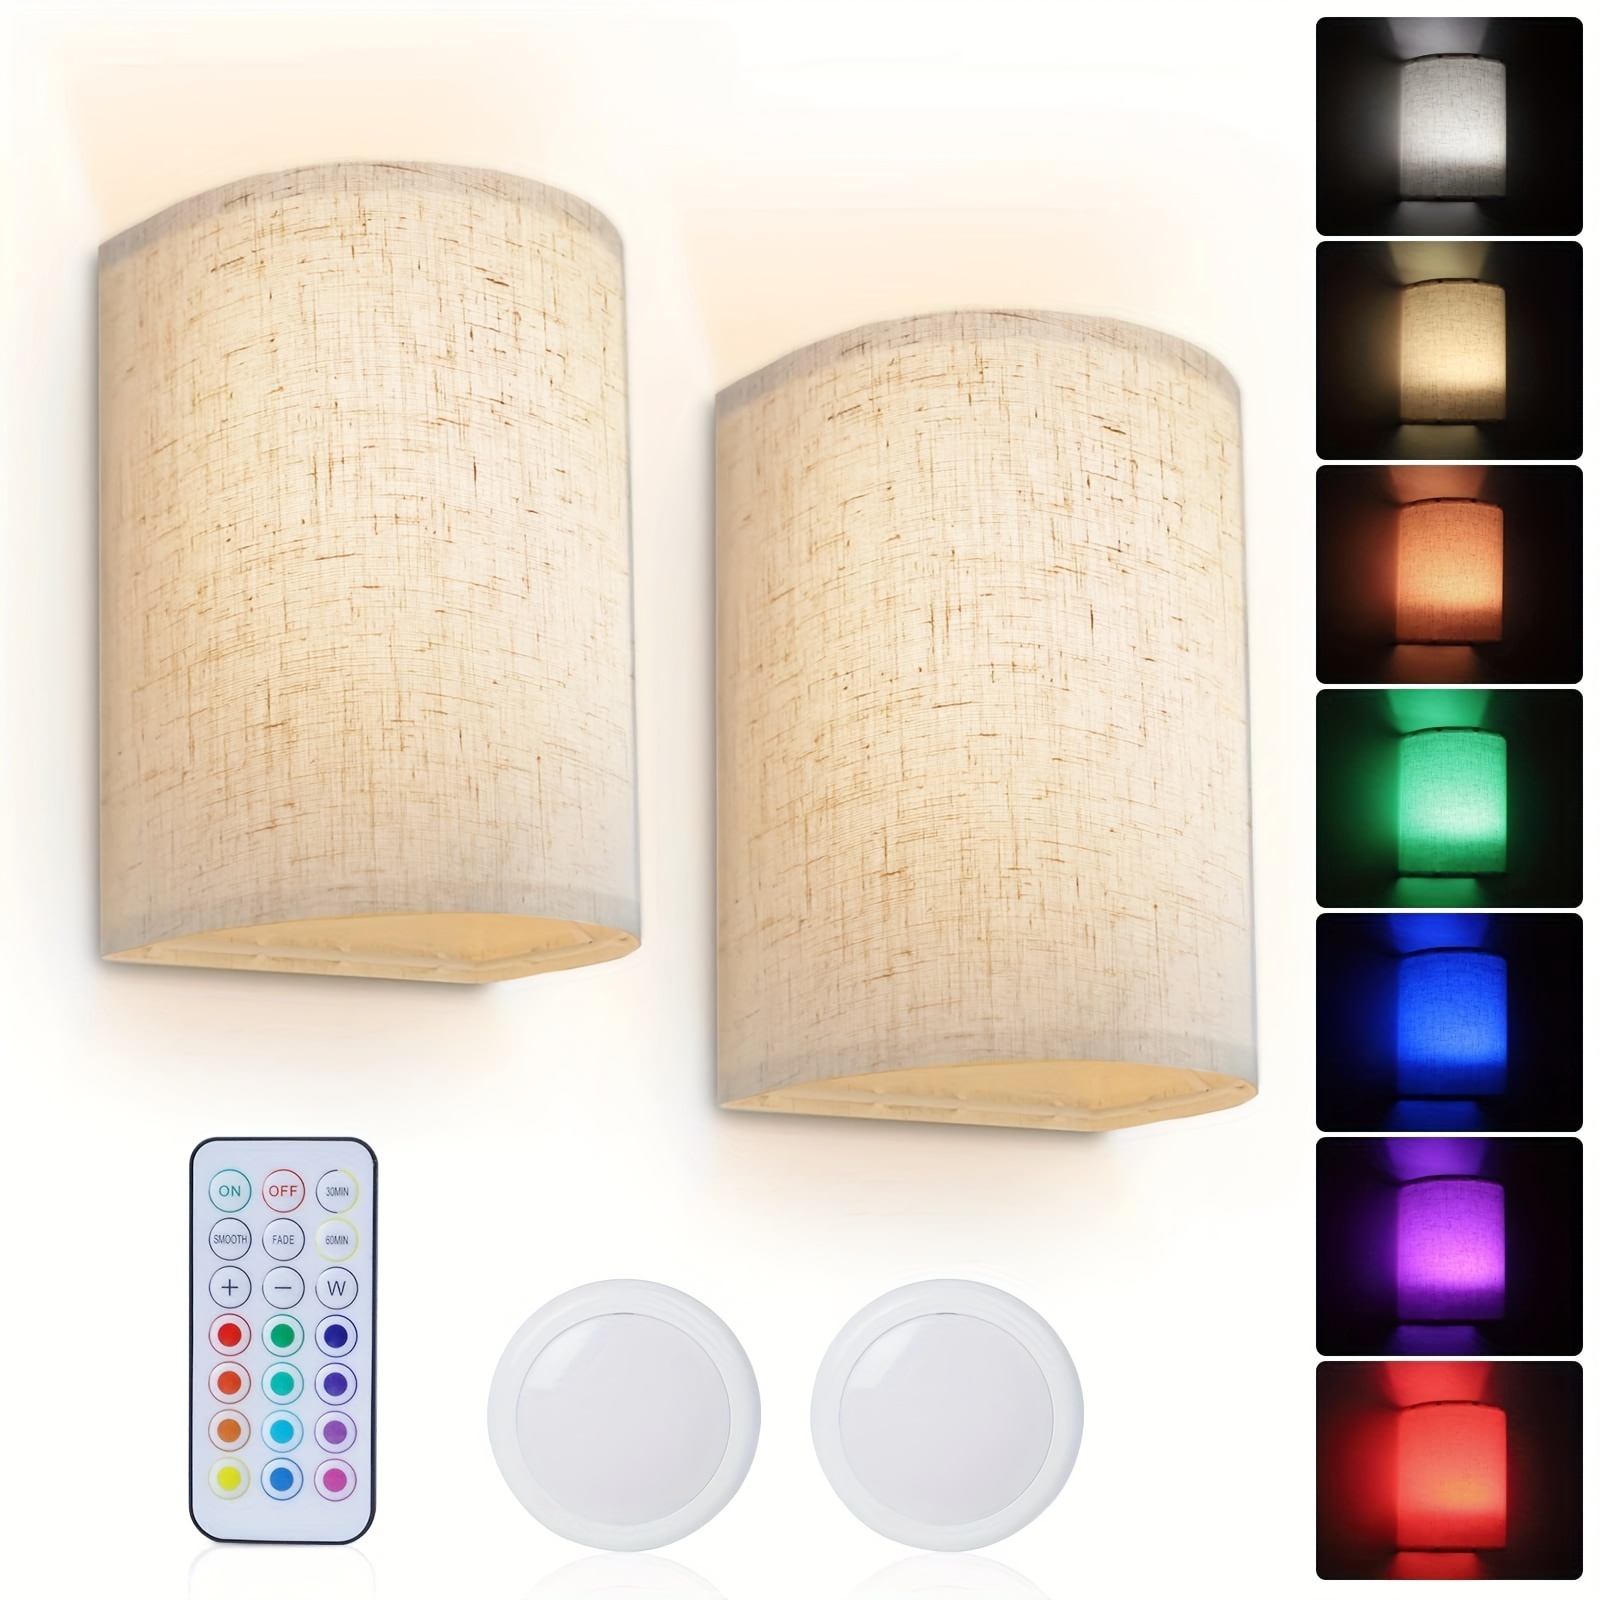 

2pack Battery Rechargeable Wall Sconce Set Of 2 With Fabric Shade Remote Control, 16 Rgb Colors Changeable Dimmable Wall Lamp Fixtures For Bedroom Living Room Hallway